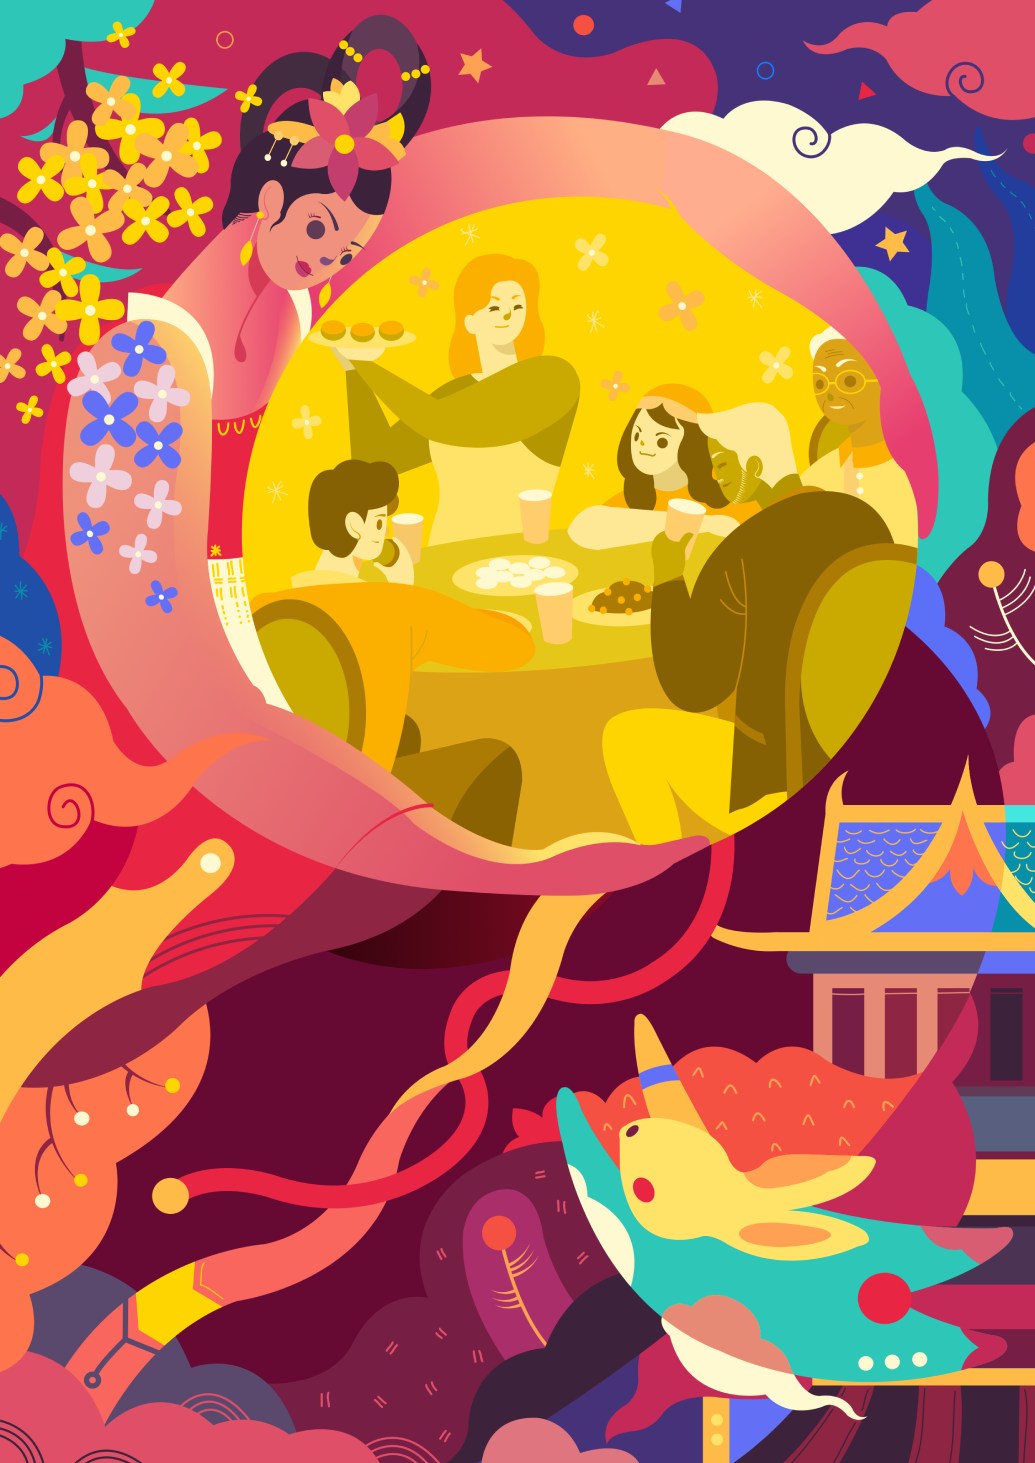 Colorful illustrated scene with figures and cultural elements